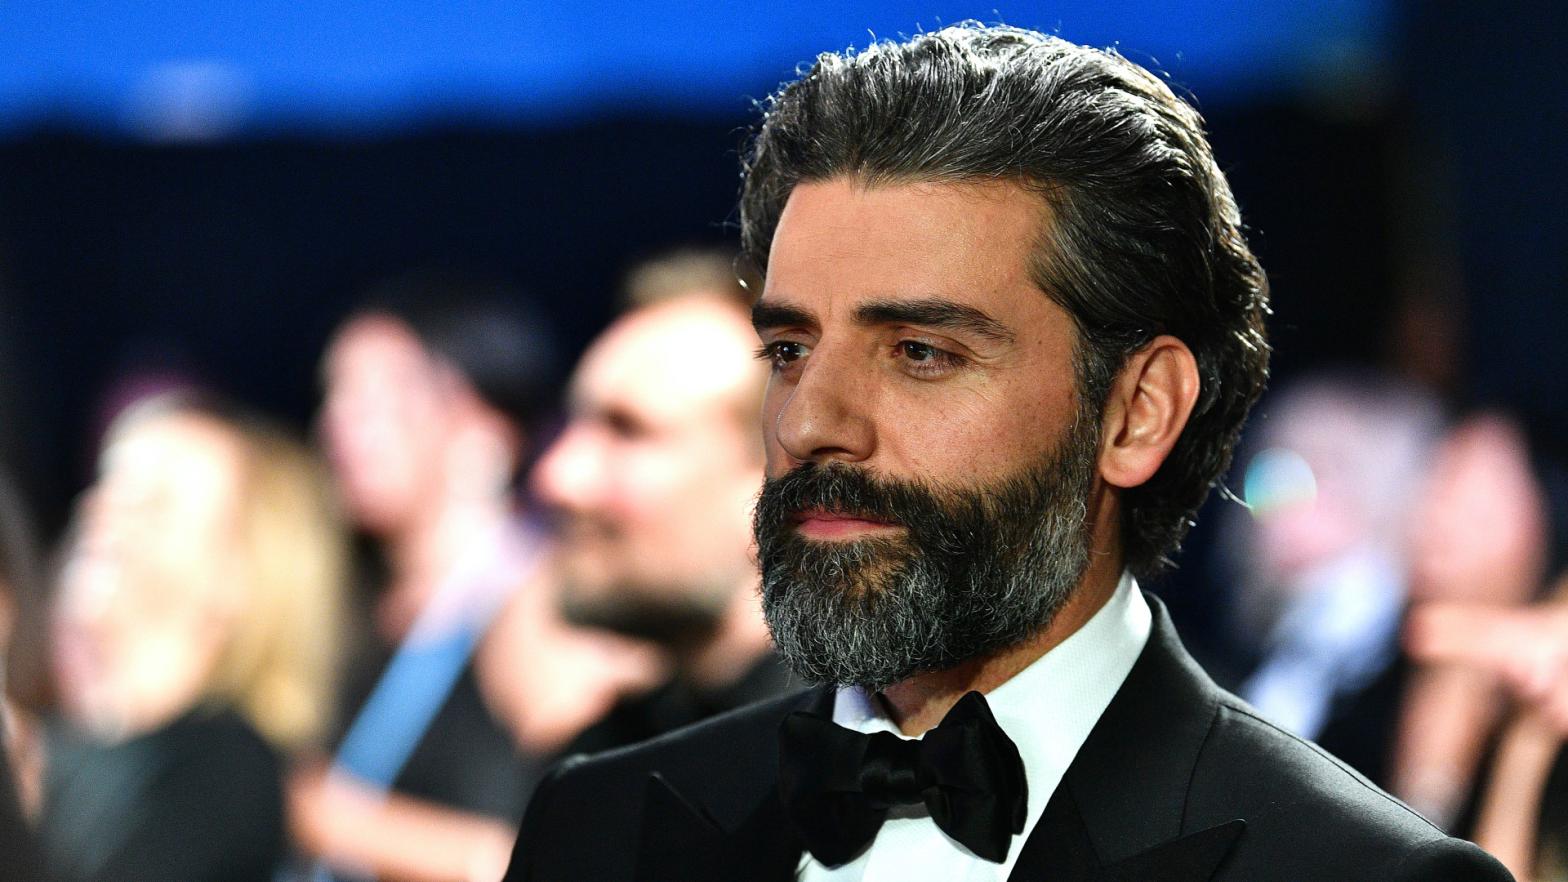 Oscar Isaac at the Academy Awards earlier this year. (Photo: Richard Harbaugh, Getty Images)